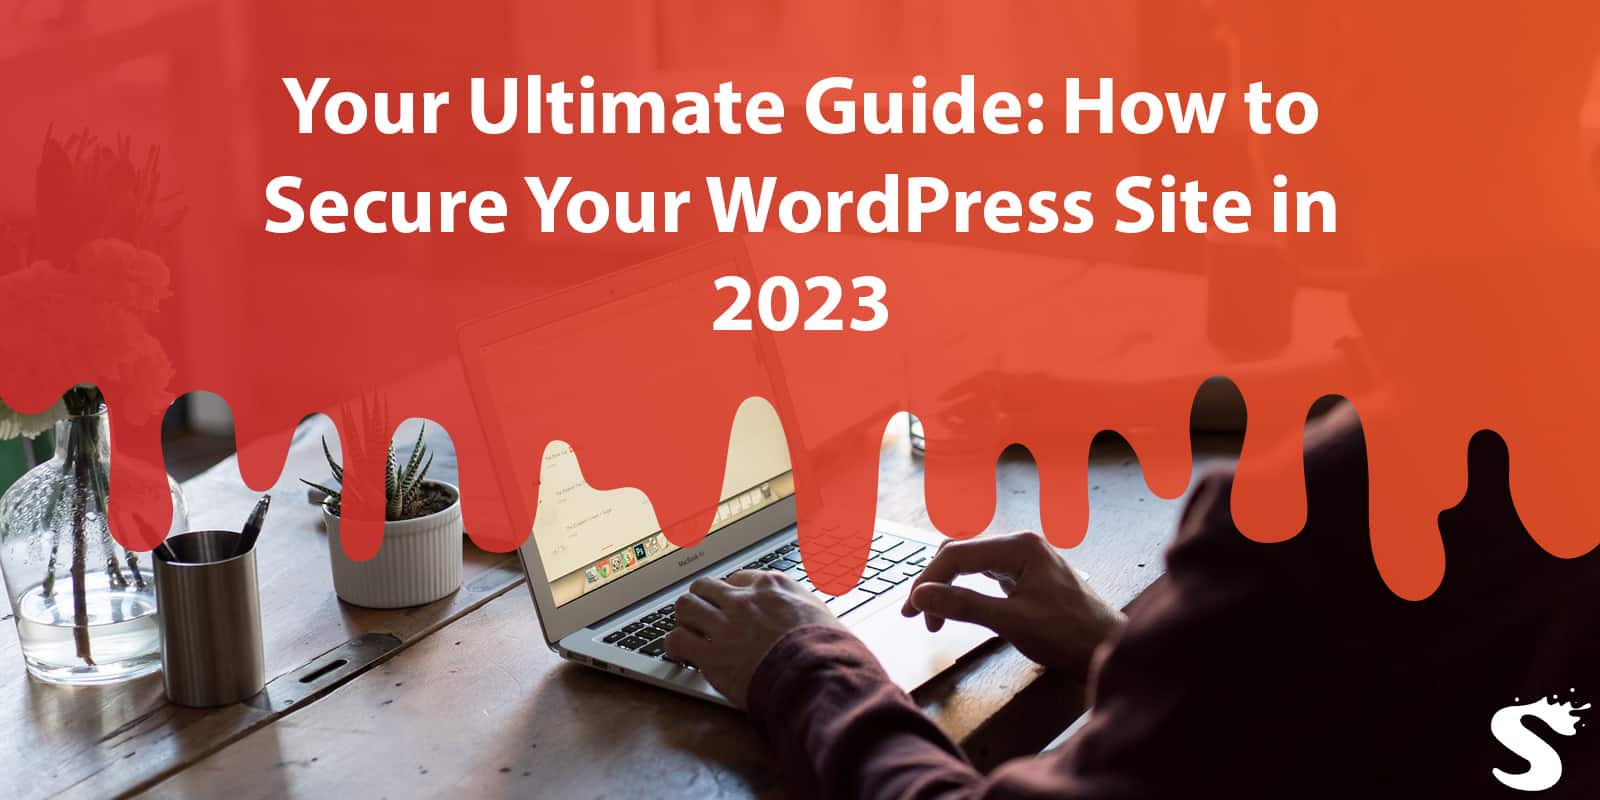 Your Ultimate Guide: How to Secure Your WordPress Site in 2023